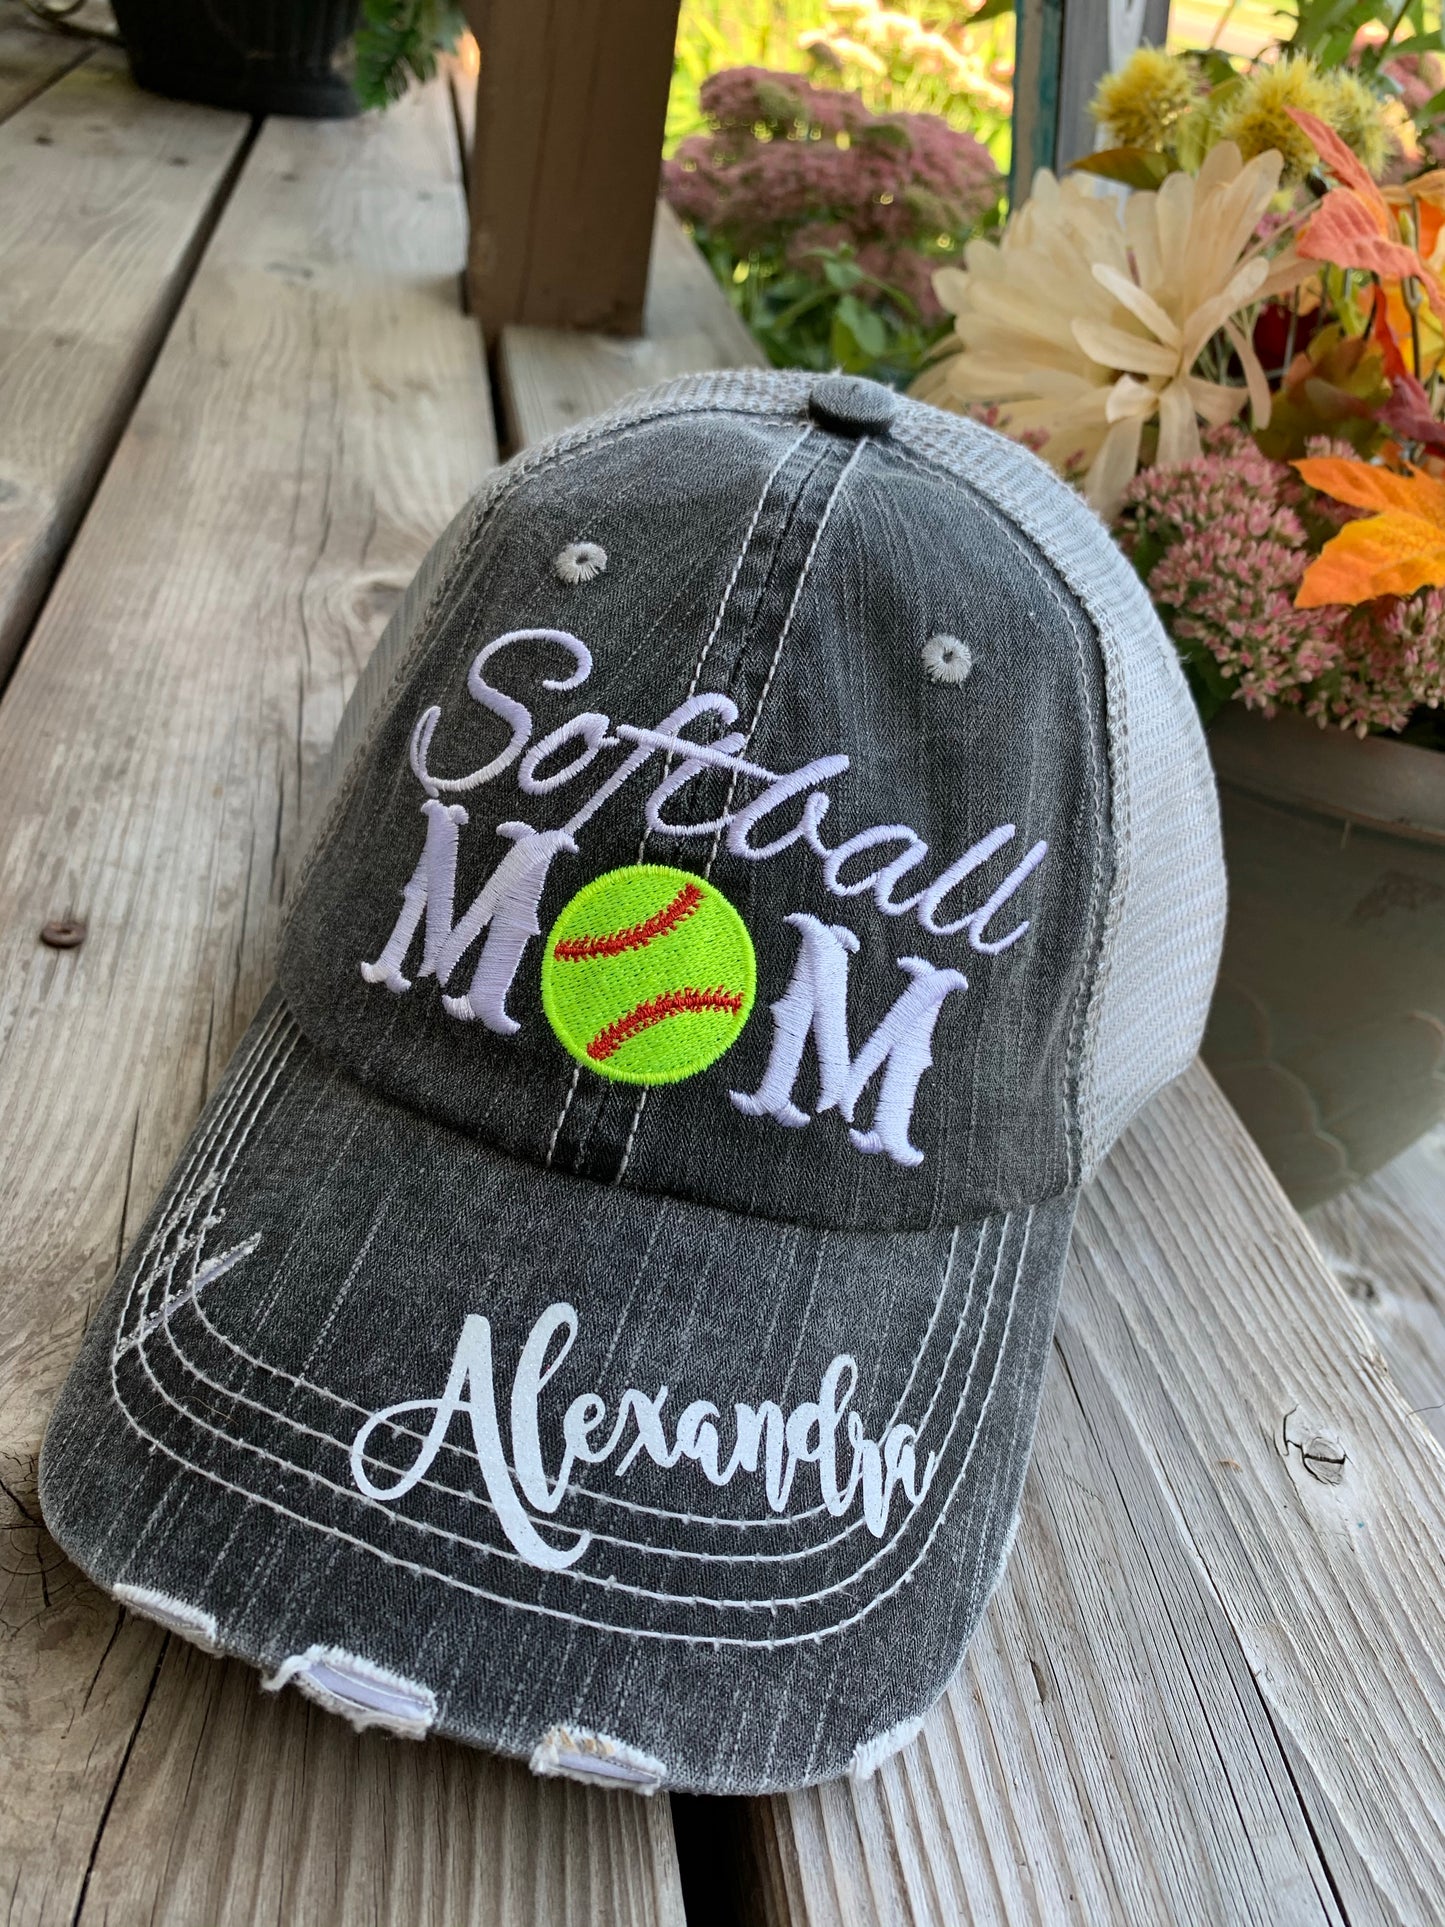 Sports mom Hats! Mom trucker caps-Customize-number-names-BLING! Hockey sticks. Mama. Womens distressed adjustable caps. Hockey mom. - Stacy's Pink Martini Boutique